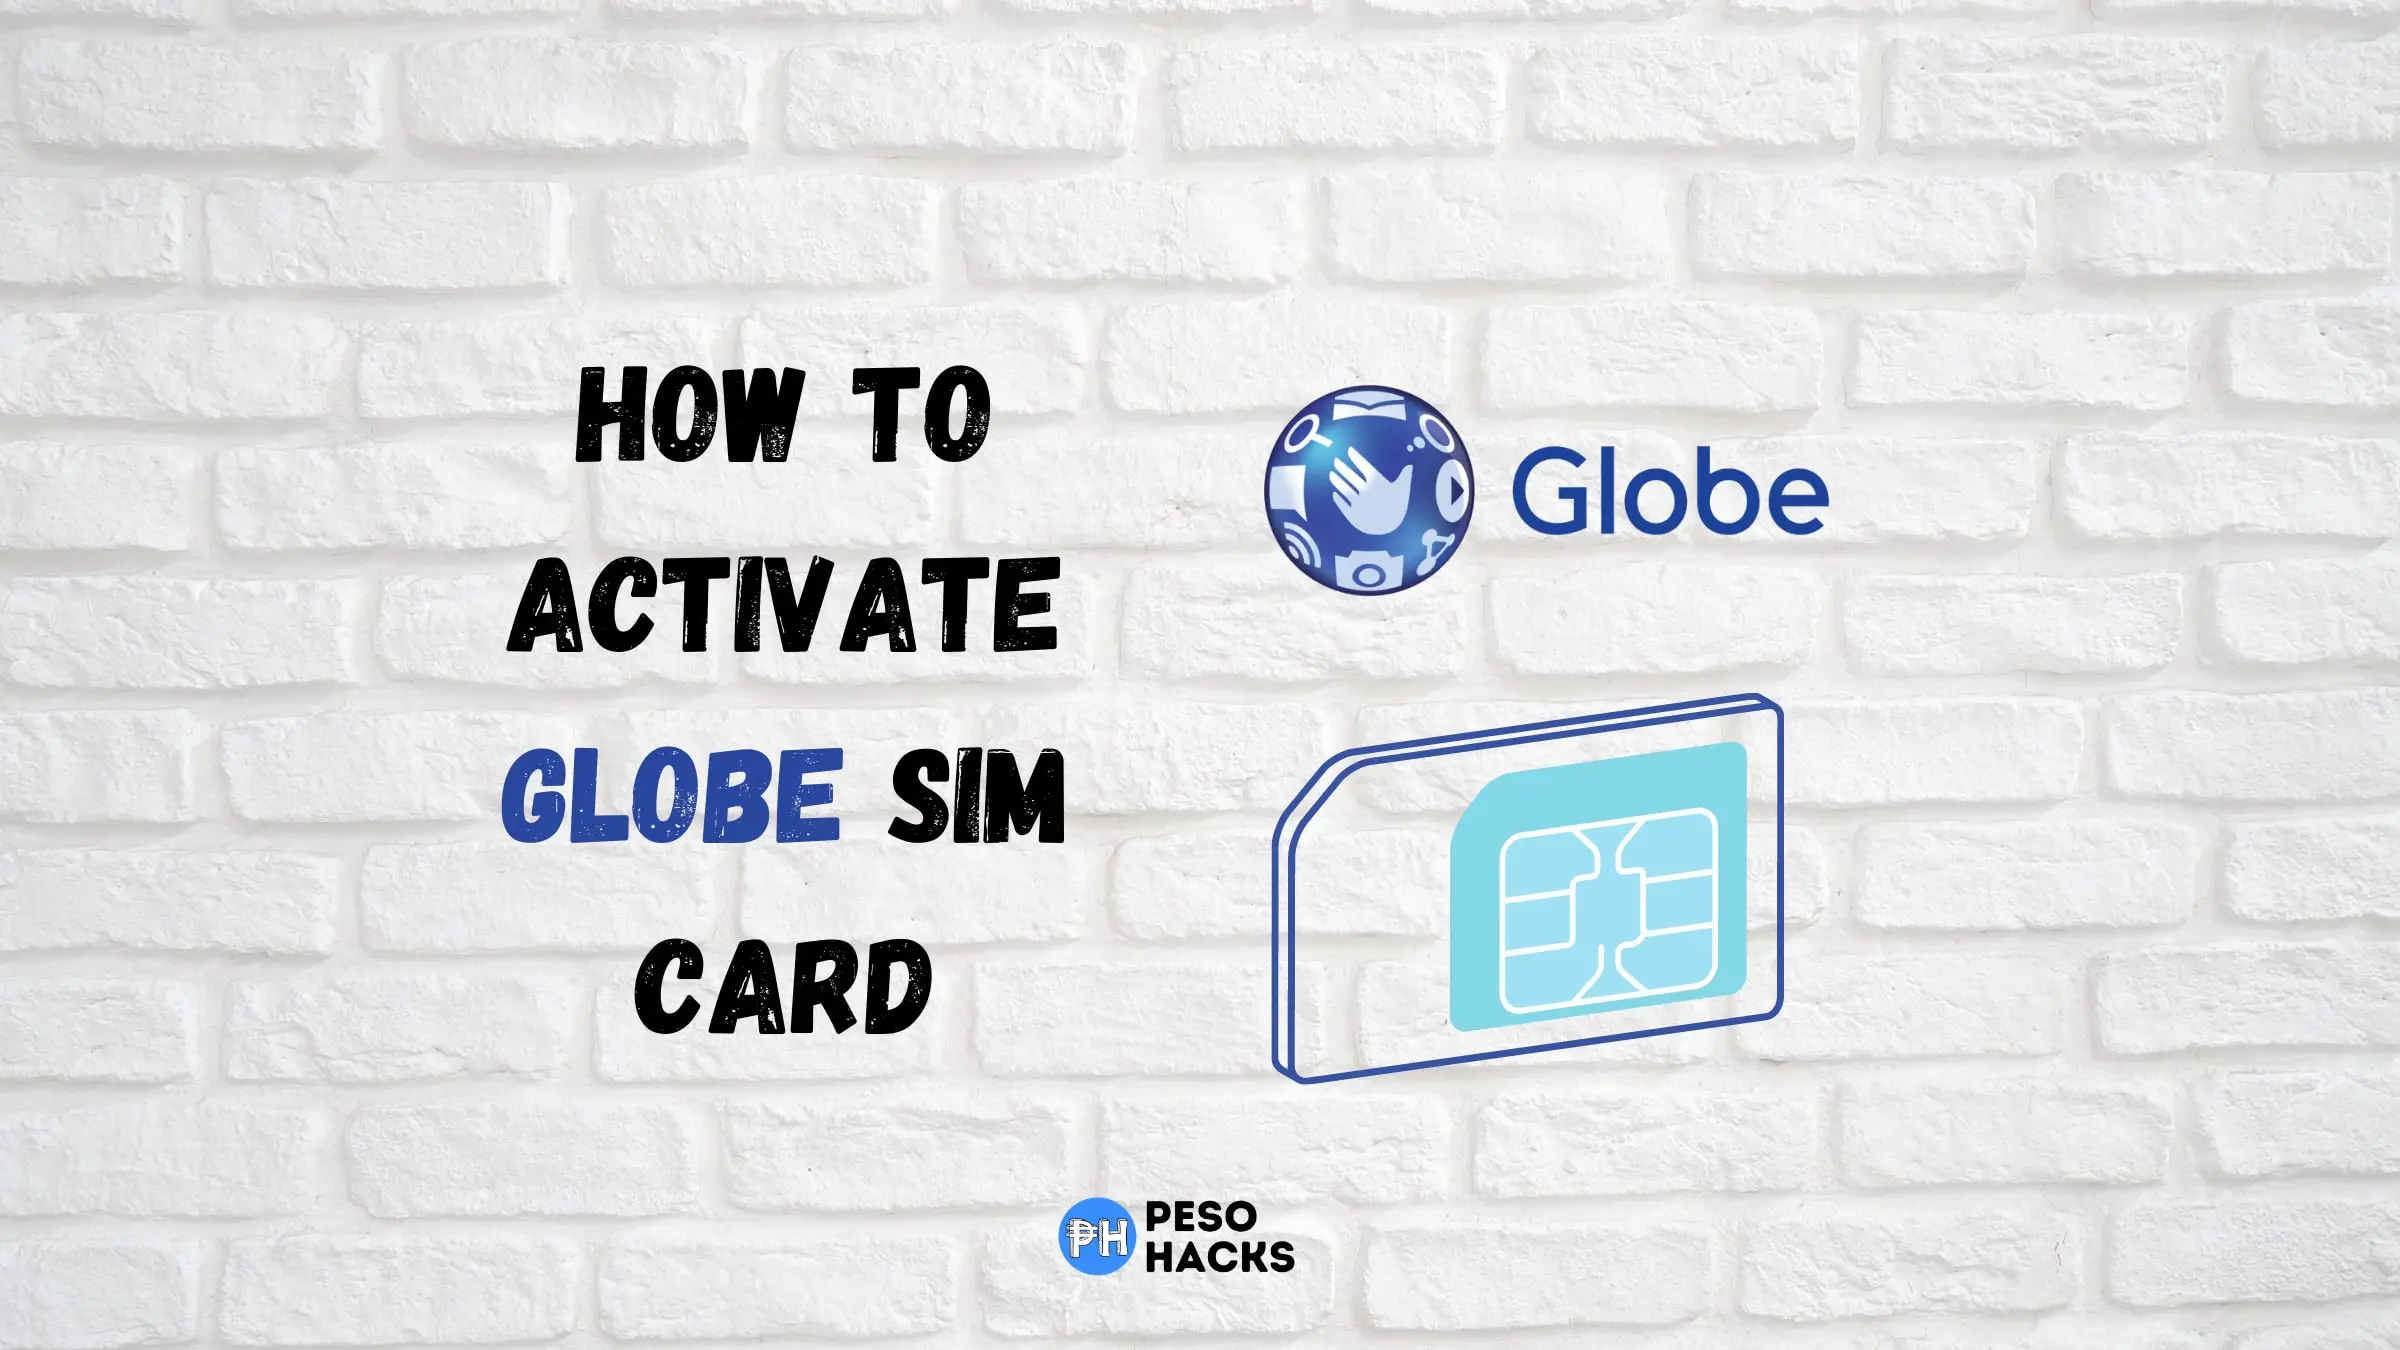 How to activate Globe sim